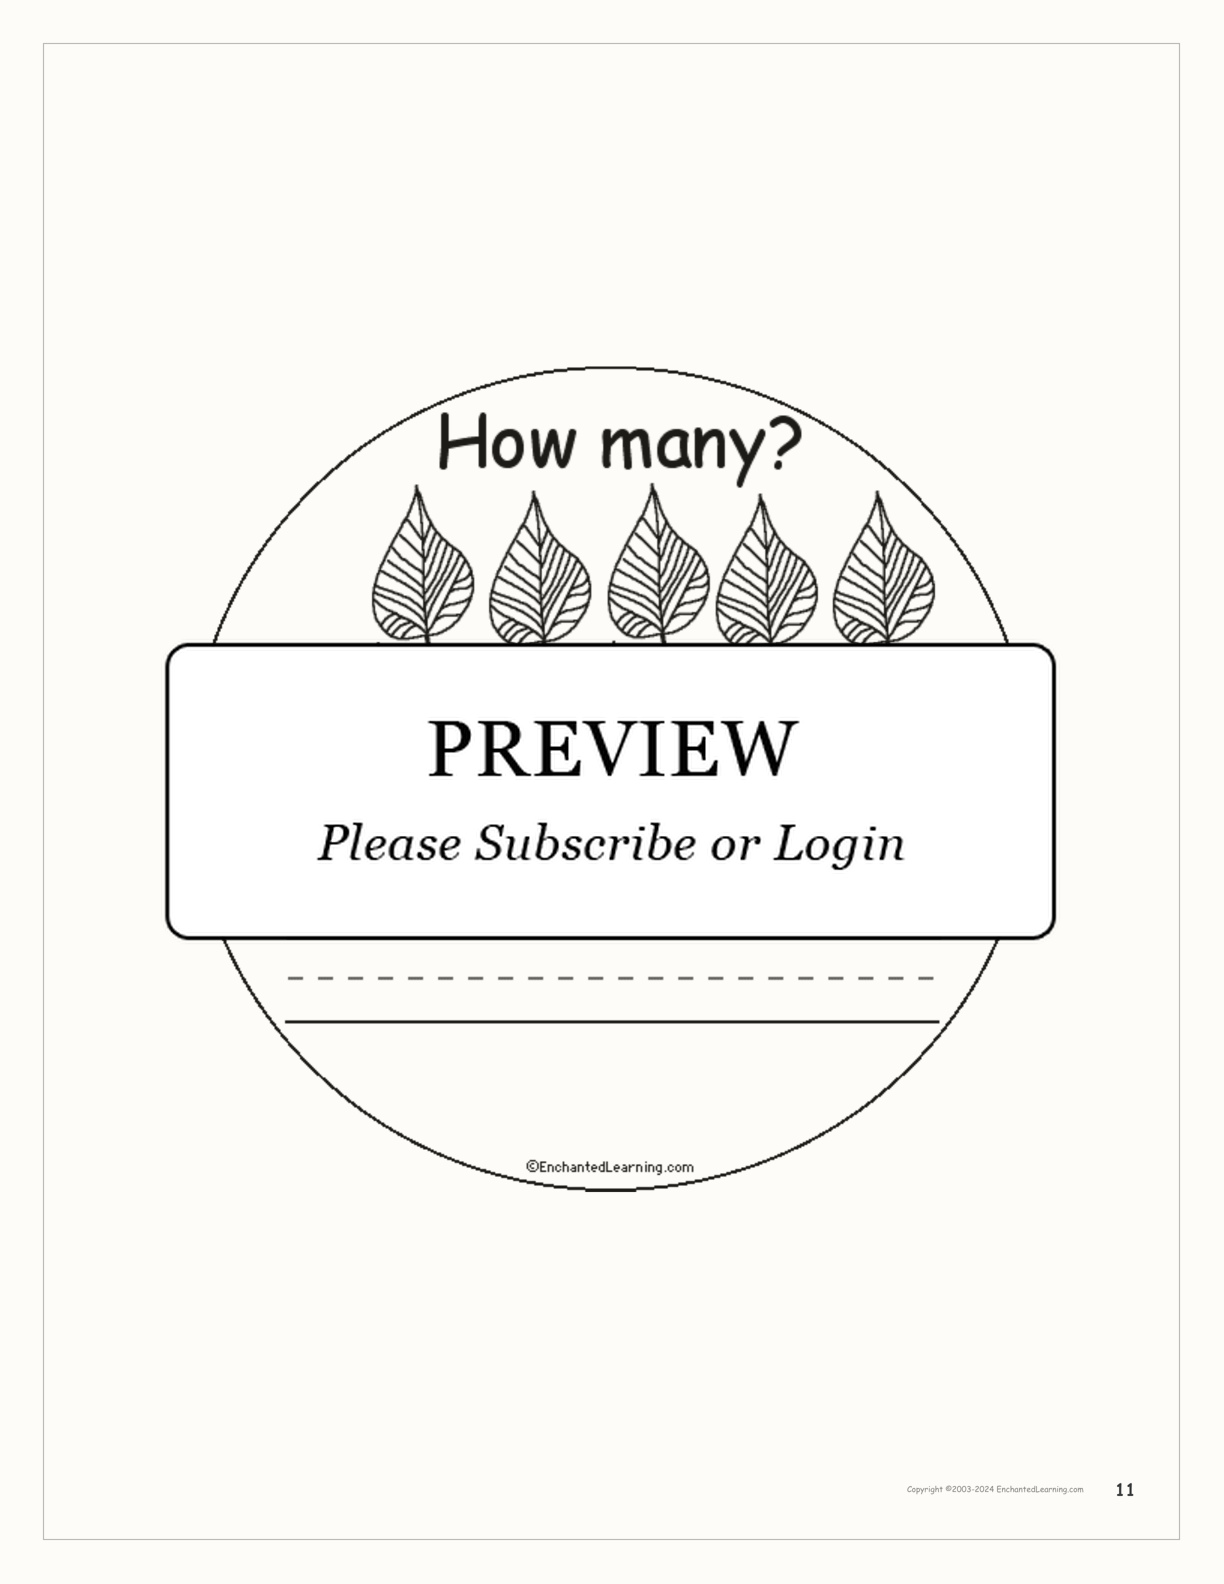 How Many Leaves? interactive printout page 11